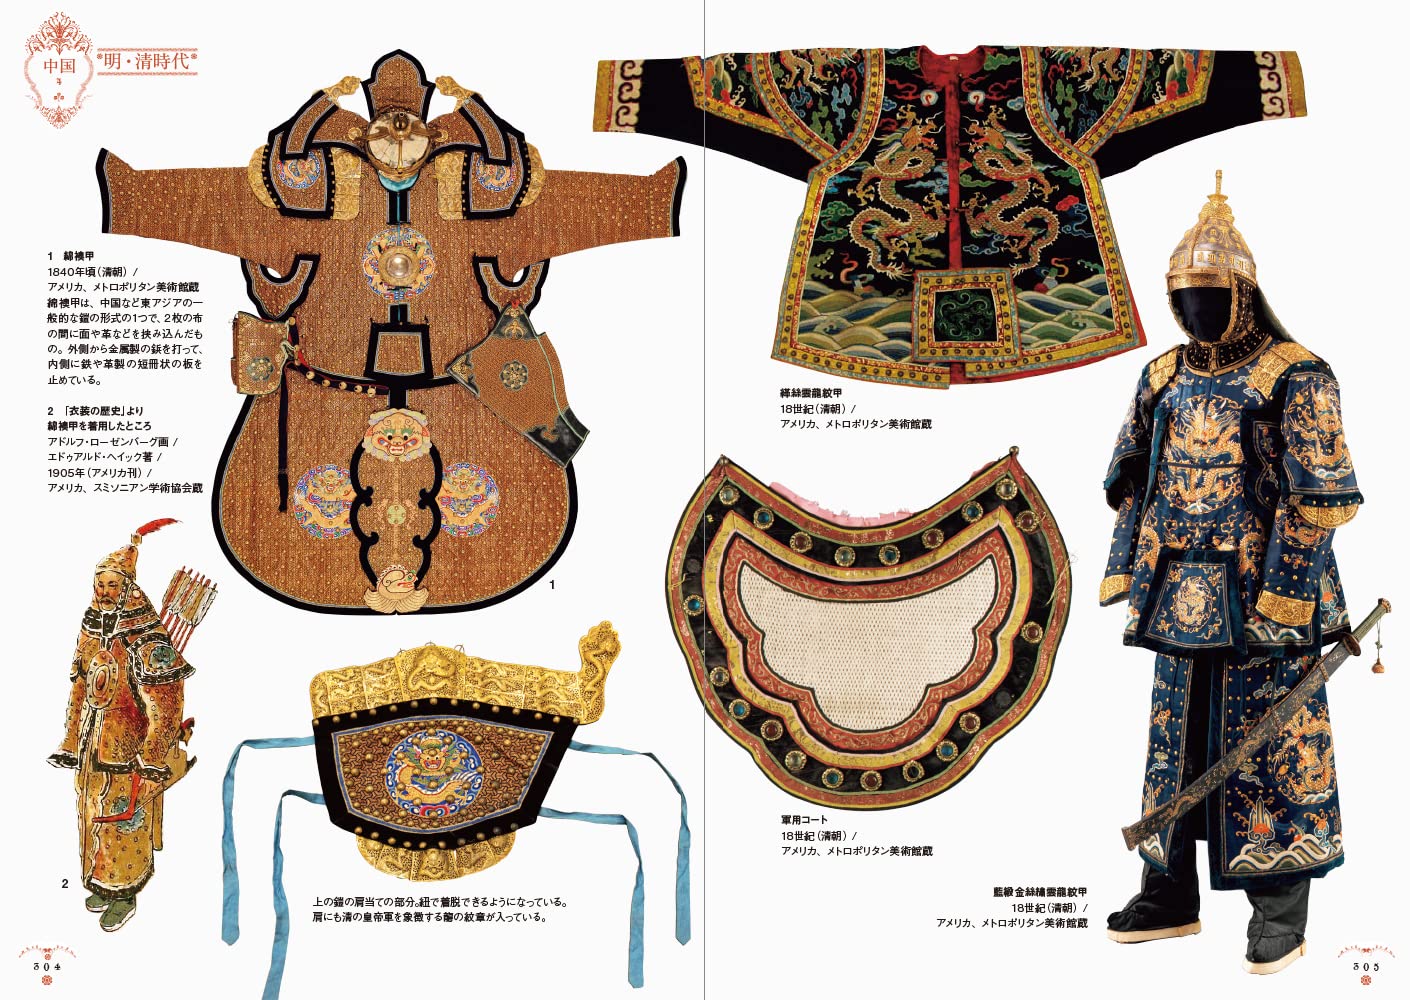 History of Ornaments and Motifs from Asia and Middle East